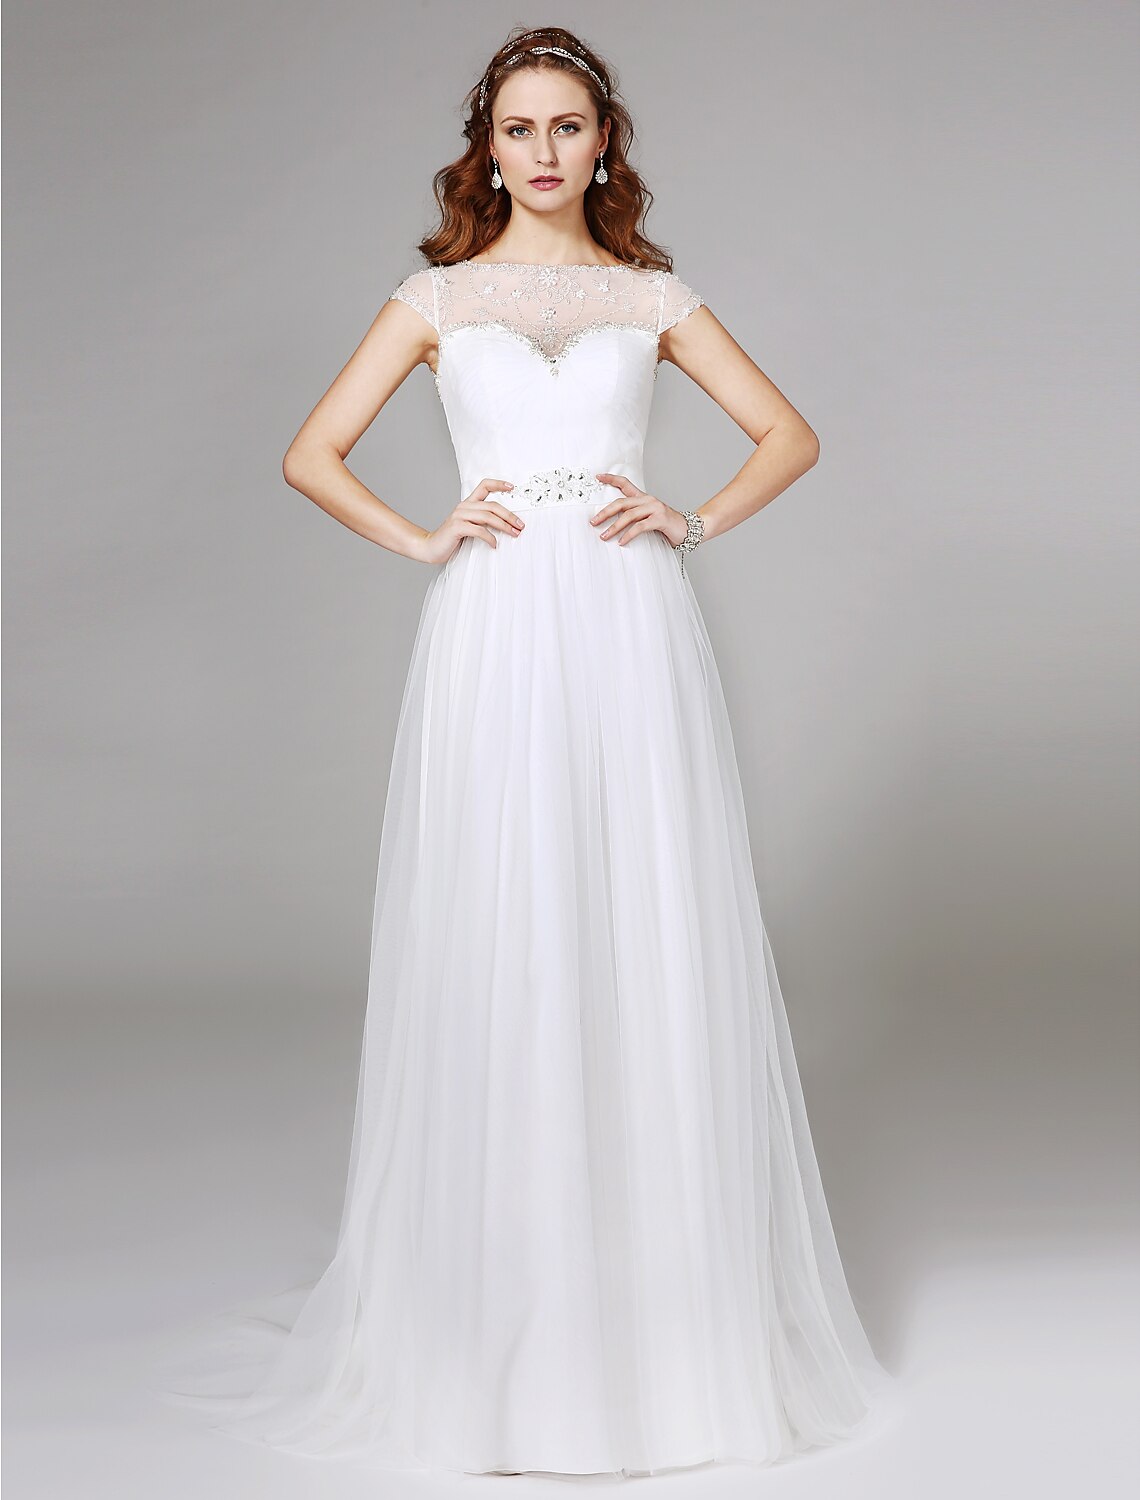 A-Line Illusion Neck Sweep / Brush Train Tulle Made-To-Measure Wedding Dresses with Beading / Lace